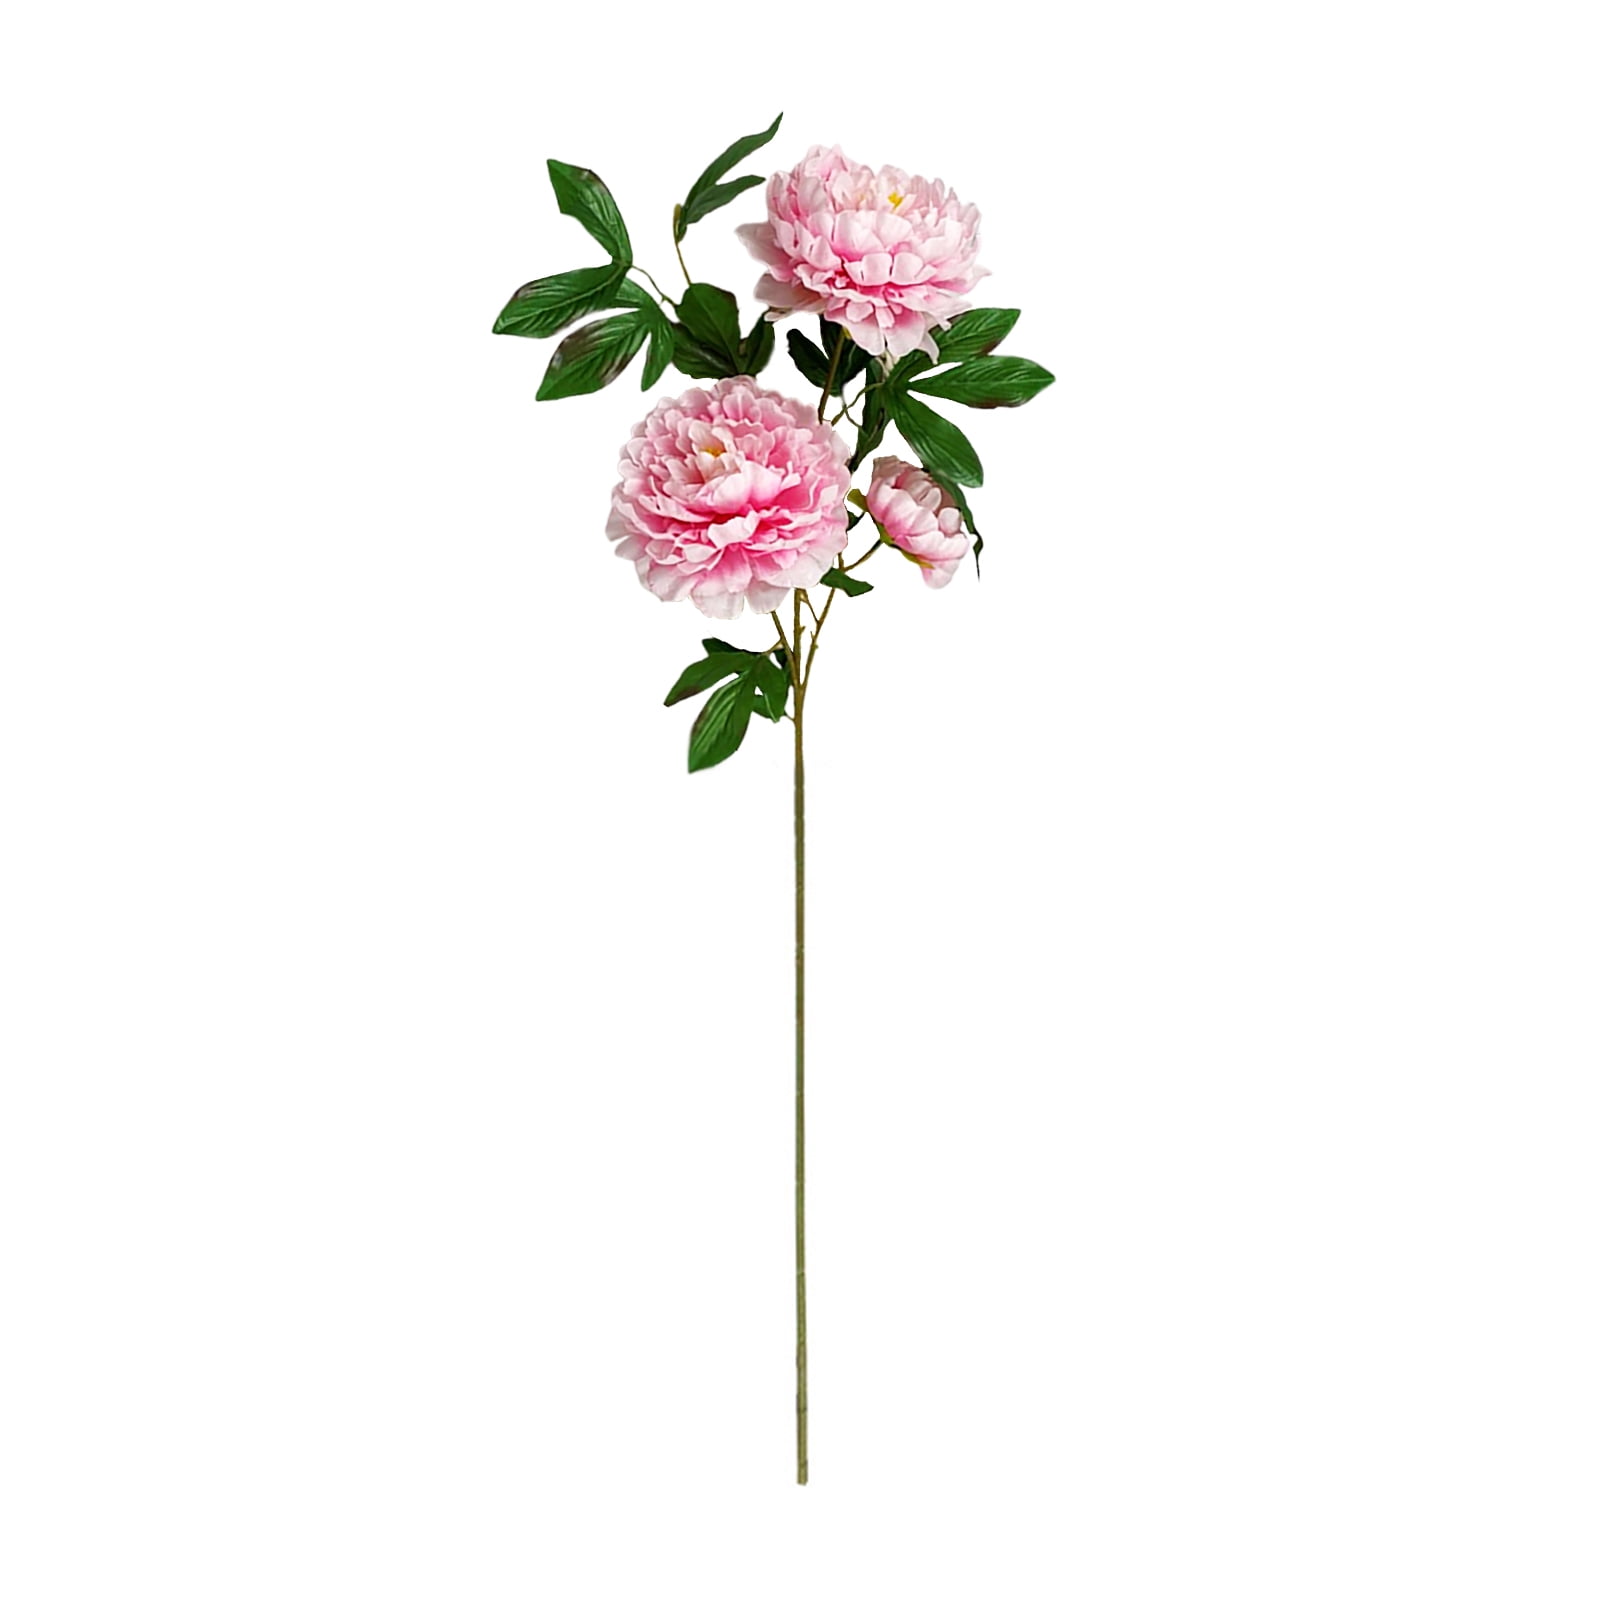 PersonalhomeD Peony Flower Artificial Flowers Peonies Cloth 106cm ...